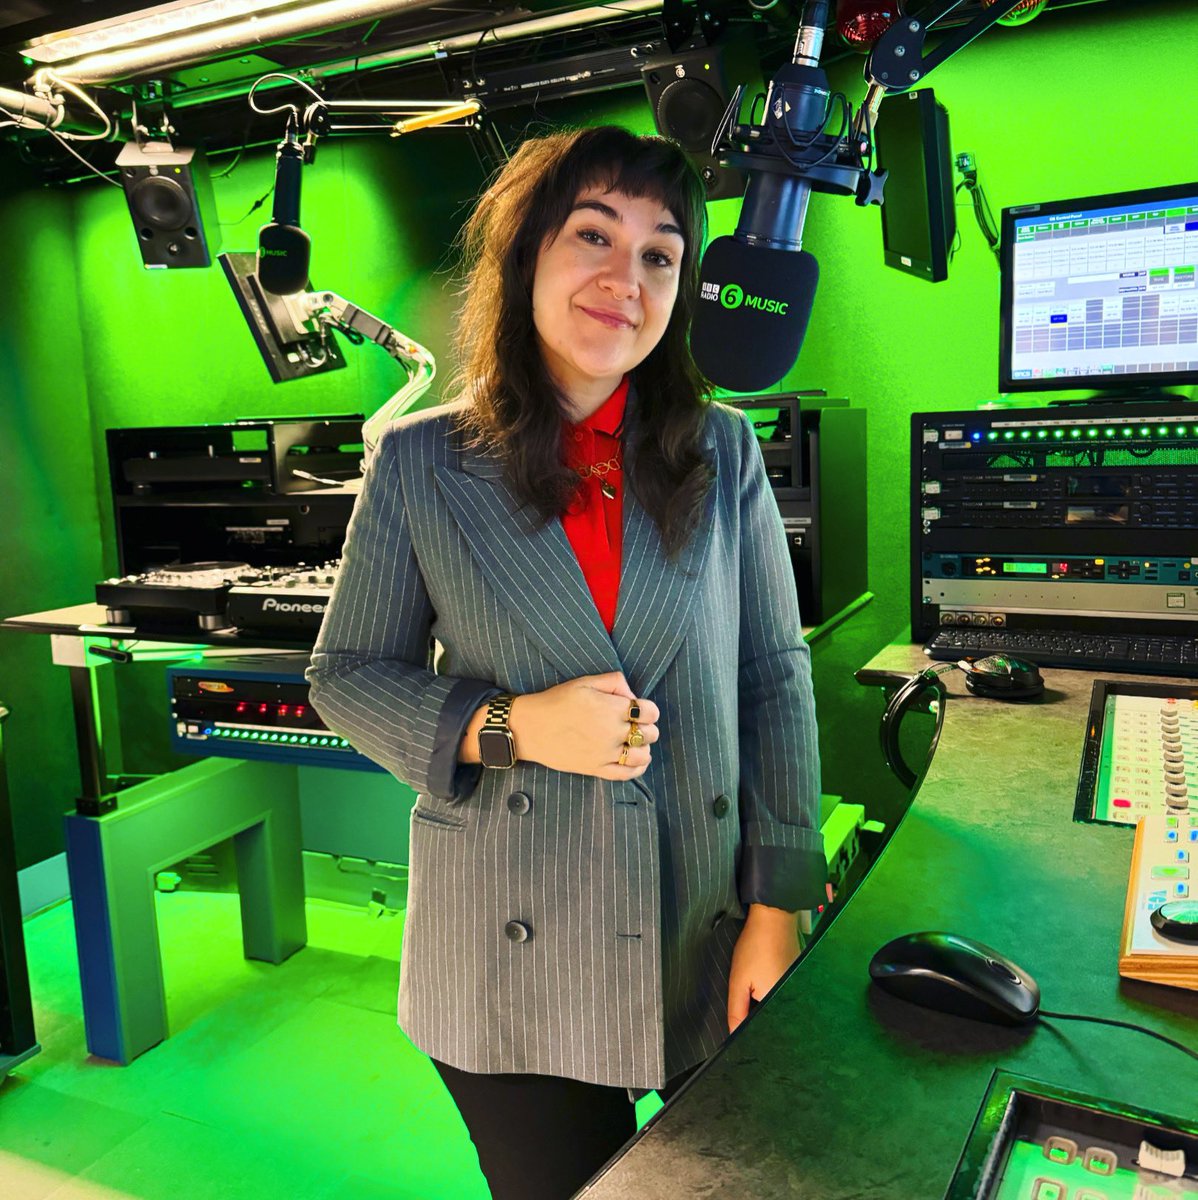 Hey guess what?! I’m back for breakfast on @BBC6Music! In for LL this week from the very lovely and very green LDN studios. Music this morning from Gil Scott Heron, Kelis, Beta Band, Al Green, Khruangbin, Bryan Ferry & MORE get into it from 7:30 🕢☝️